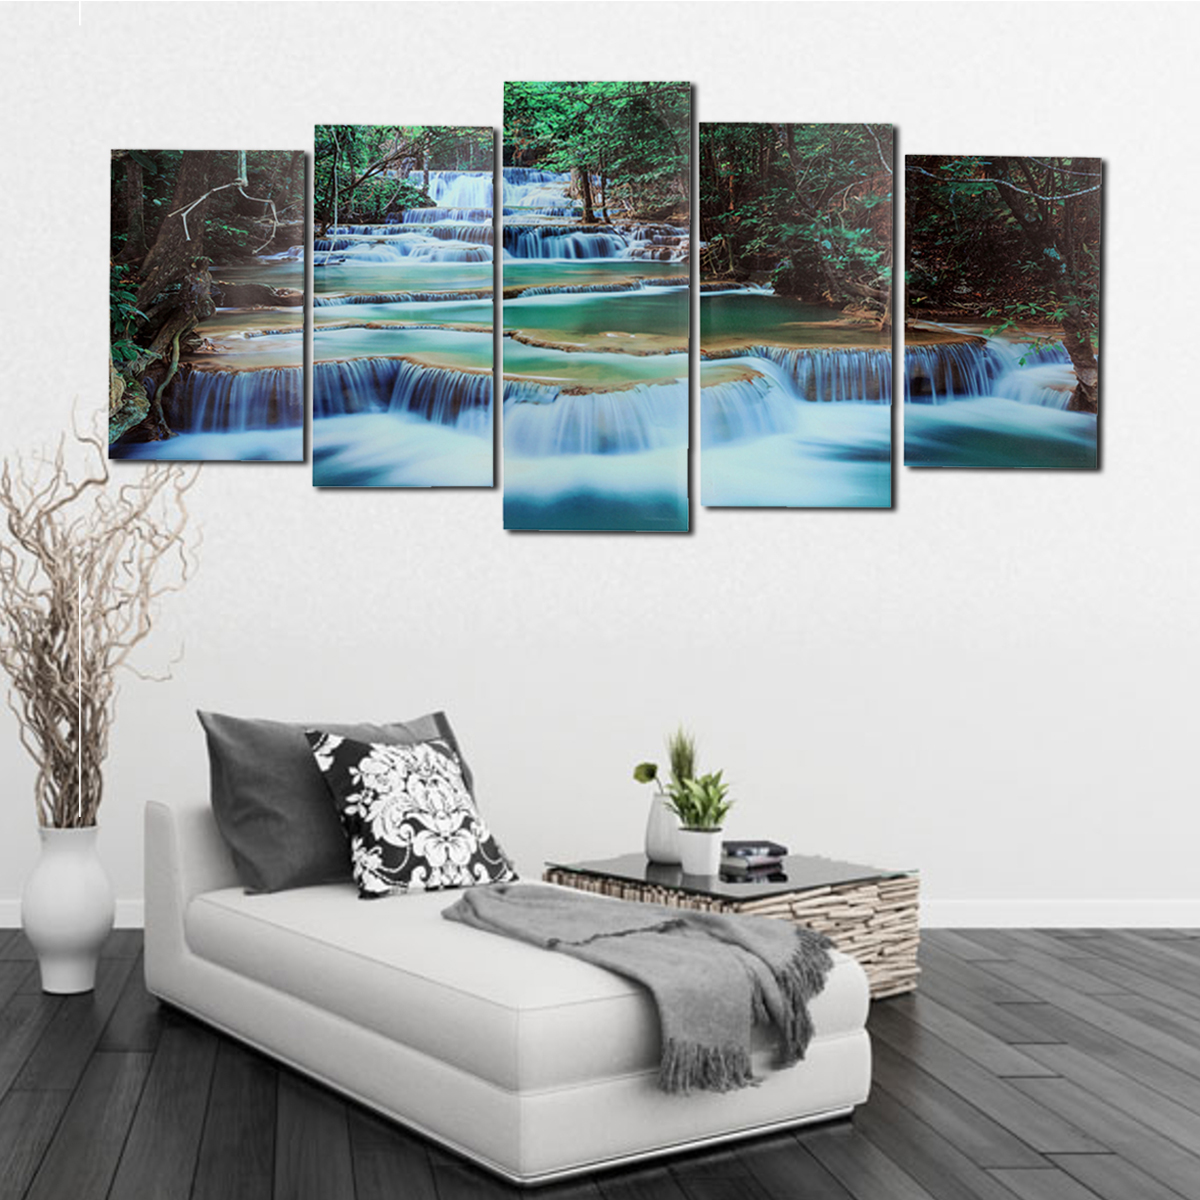 Large-Framed-Canvas-Prints-Forest-Waterfall-Painting-Home-Hanging-Wall-Decorations-1444004-4